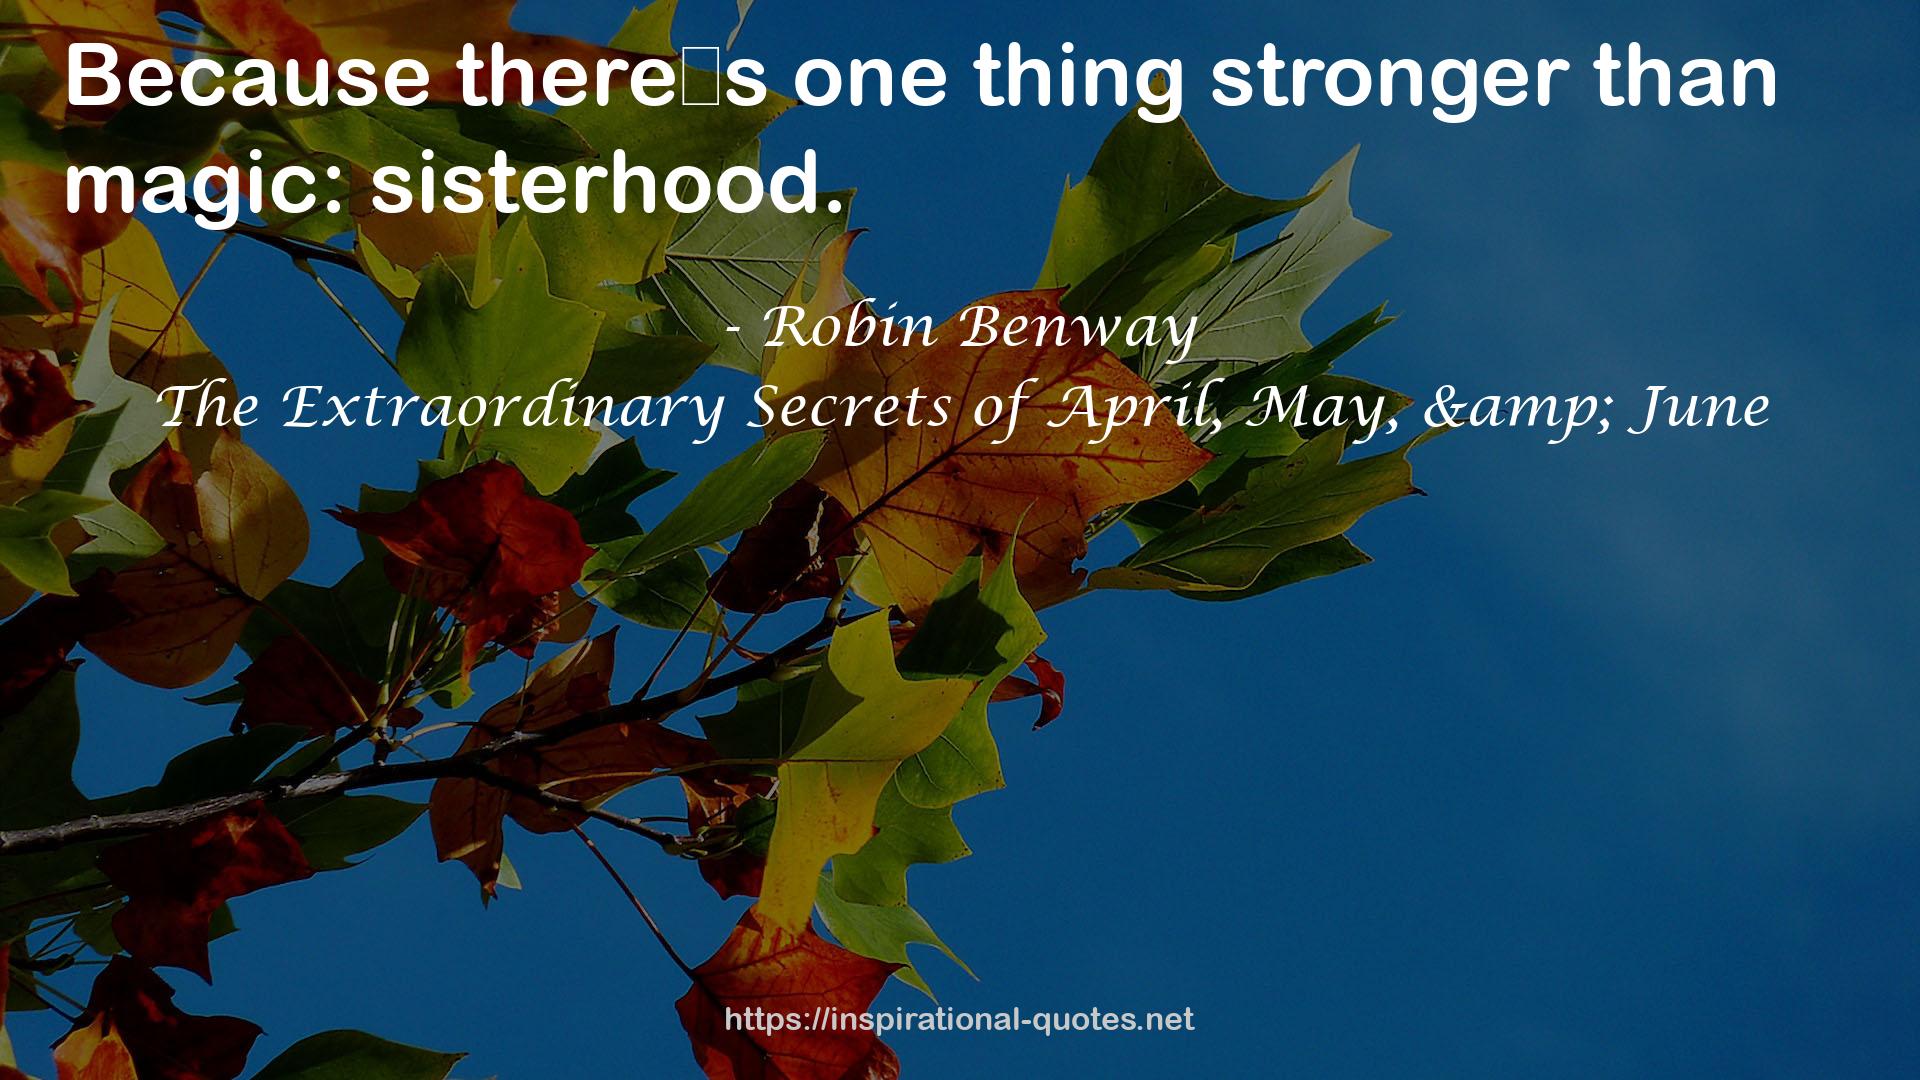 The Extraordinary Secrets of April, May, & June QUOTES